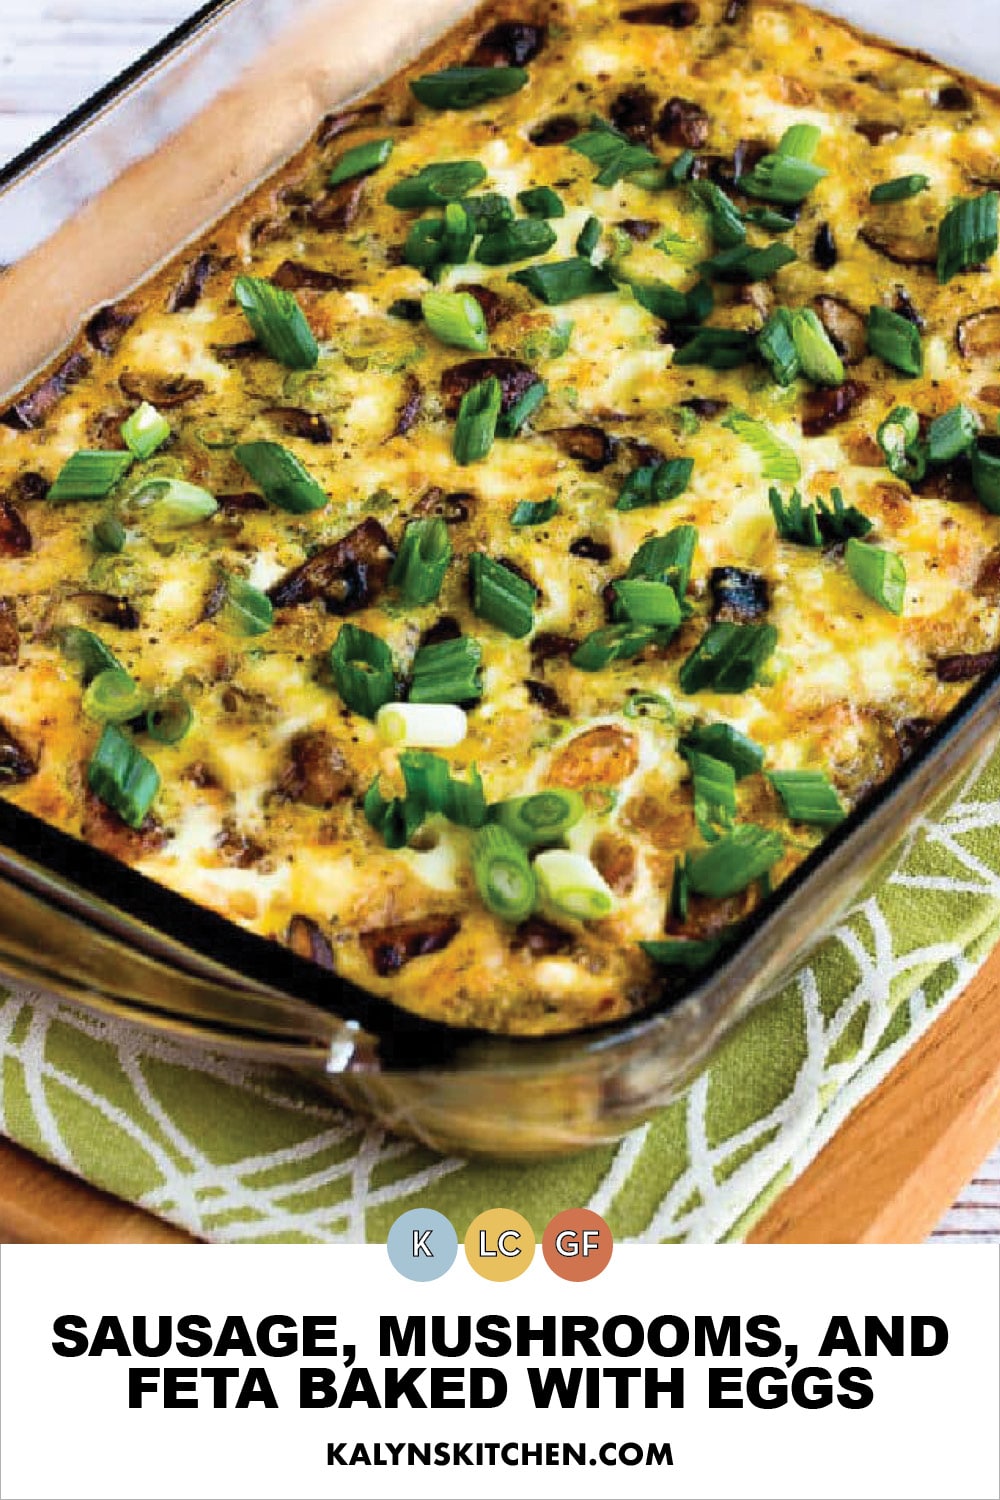 Pinterest image of Sausage, Mushrooms, and Feta Baked with Eggs